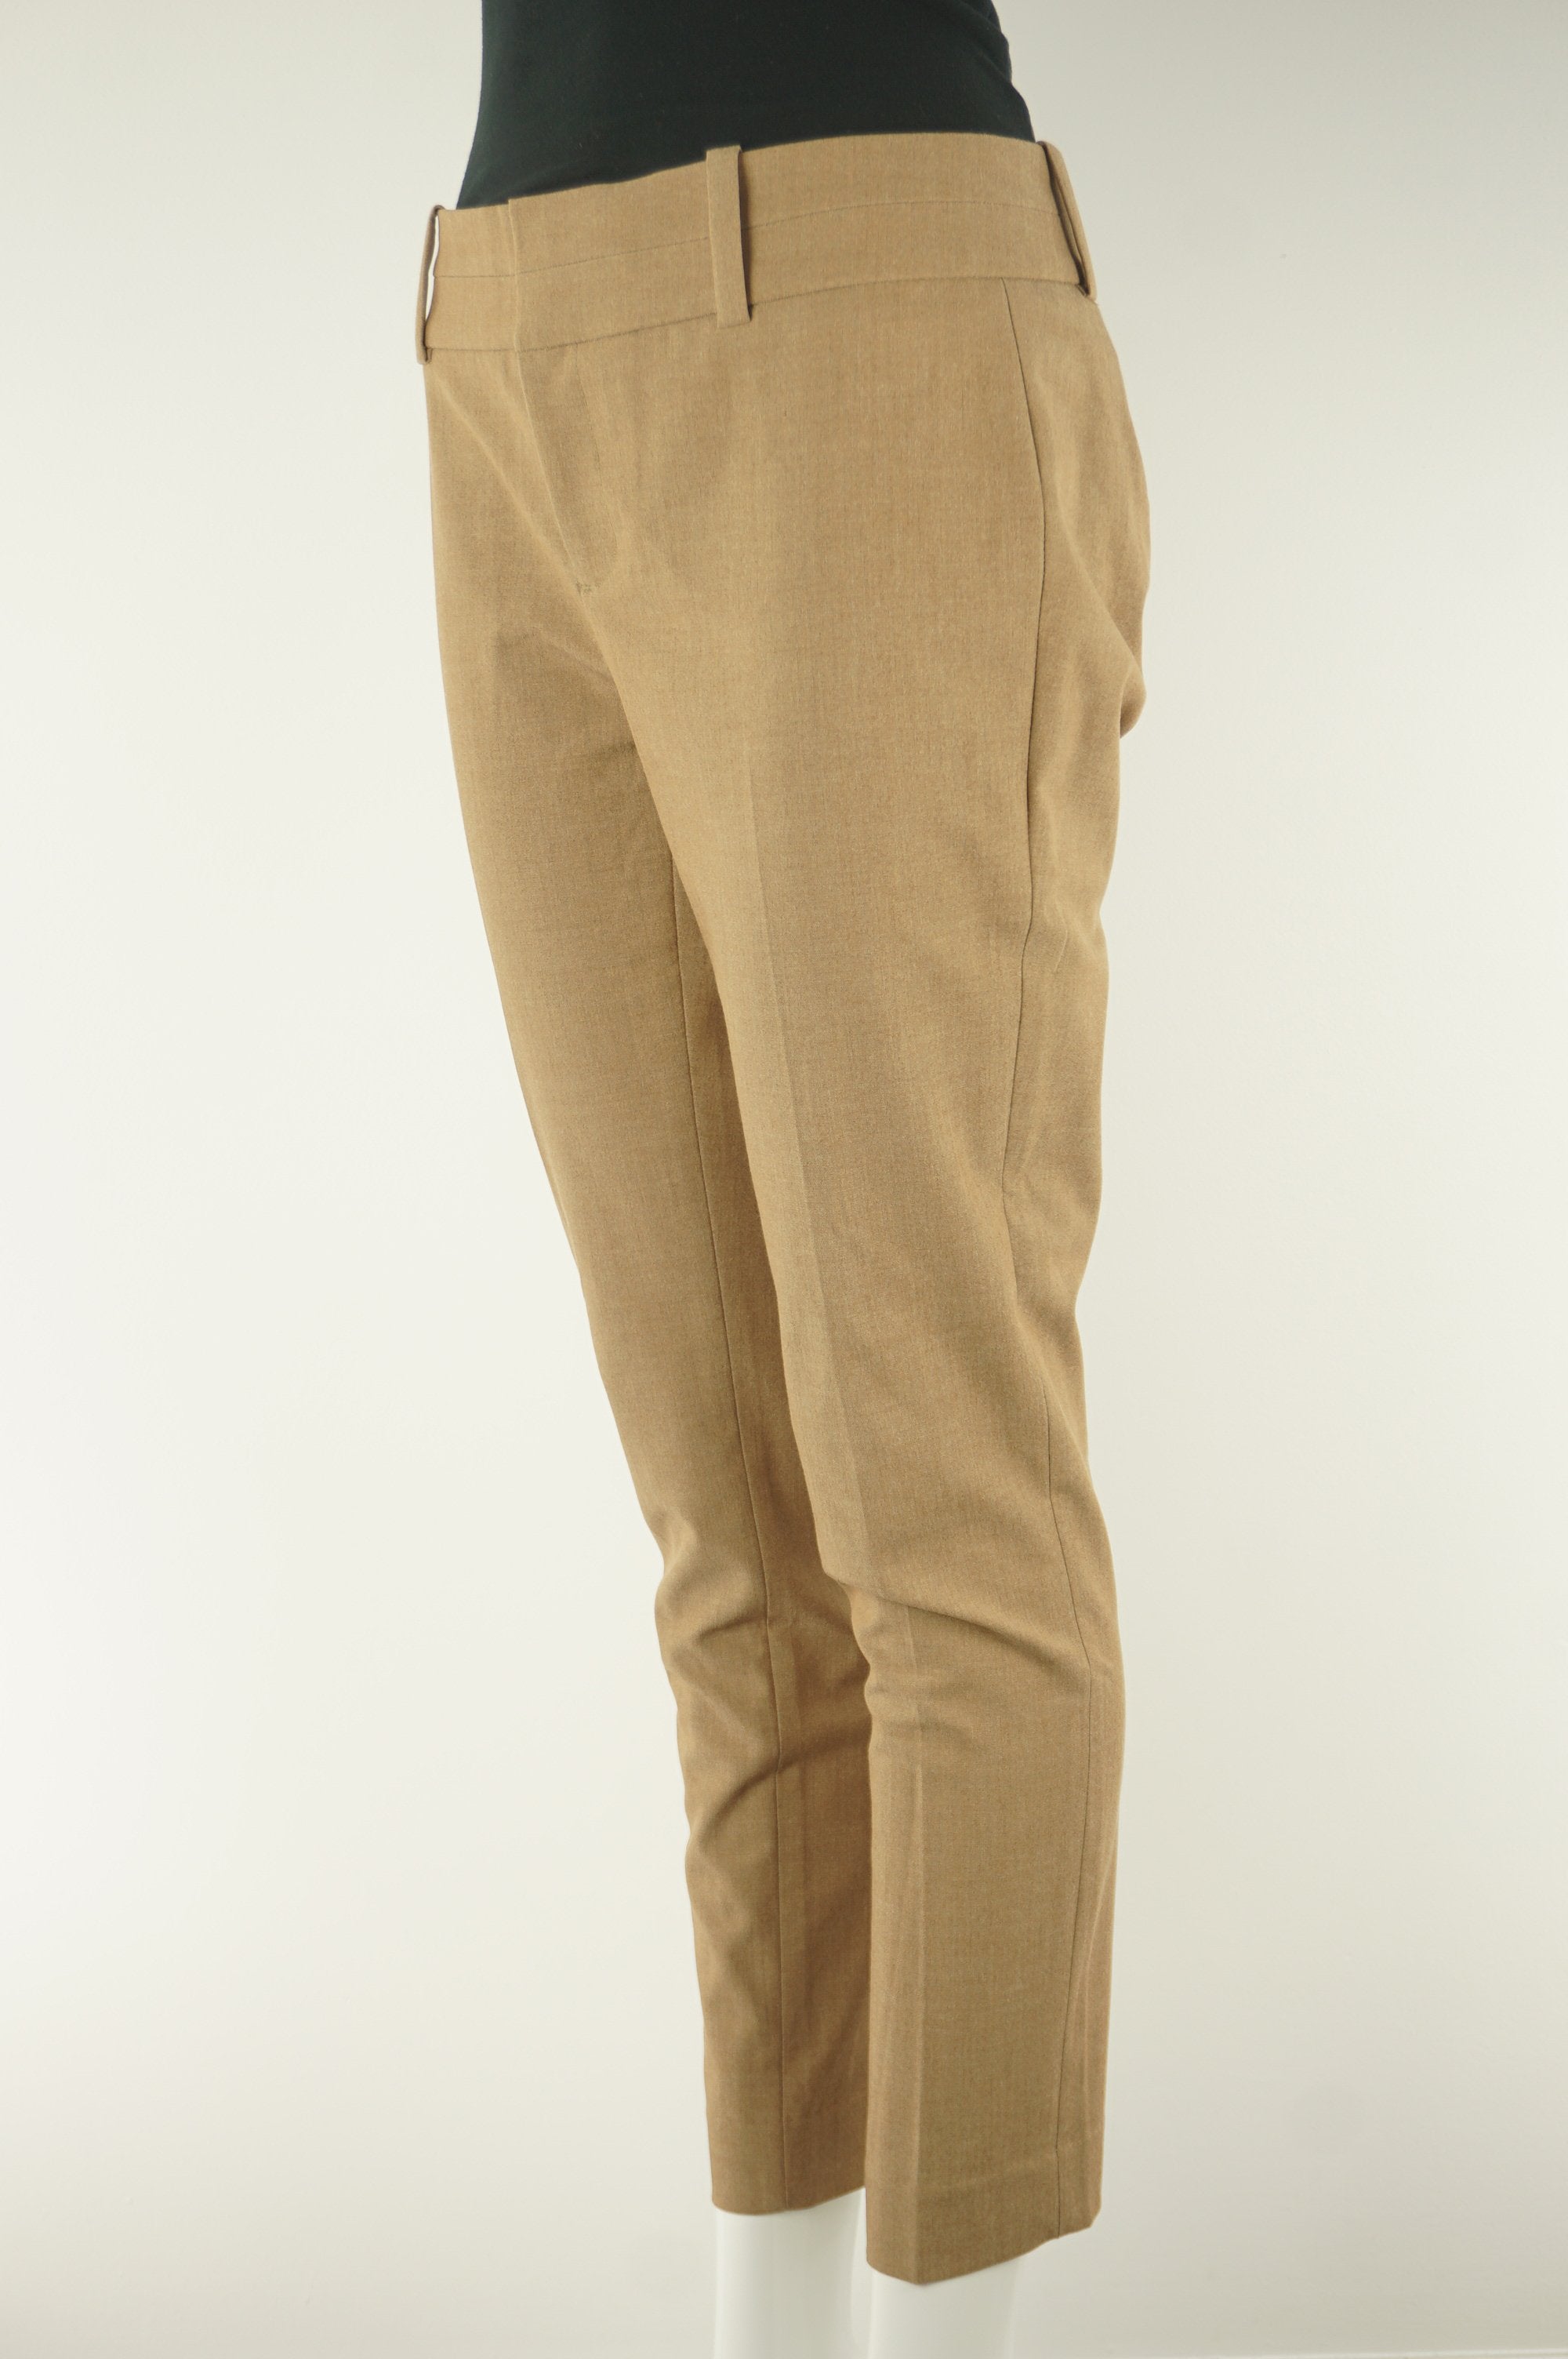 Calvin Klein Stretchy Dress Pants, A clean and professional pair of pants for the best boardroom impression (not that you need it, because you are killing it already). Not to mention the comfortableness provided by the stretchy fabric. , Brown, 67% Polyester, 29% Rayon, 4% Elastane, women's Pants, women's Brown Pants, Calvin Klein women's Pants, comfortable women's dress ankle pants, women's professional ankle pants, women's professional straight ankle trousers